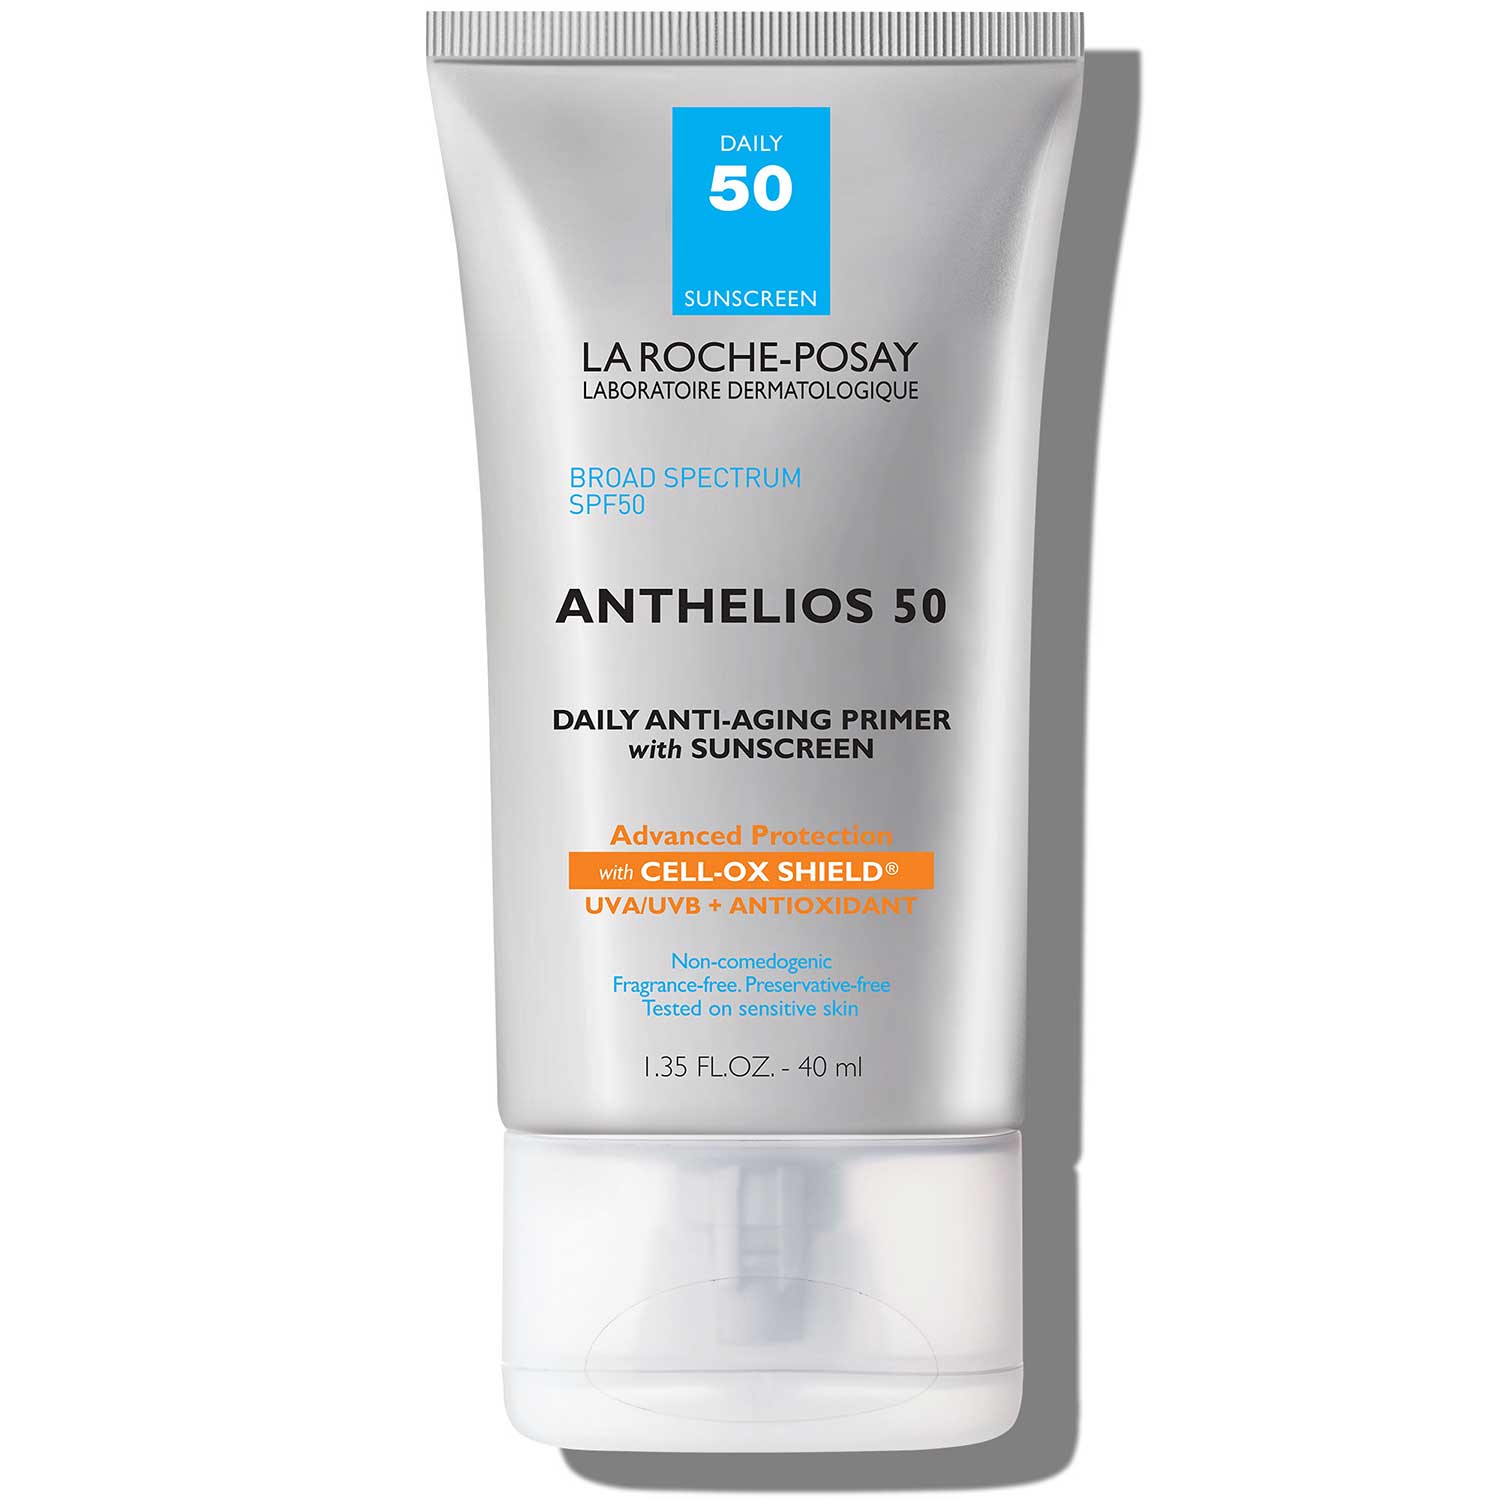 2432 - Anthelios Anti-Aging Primer with SPF 50 Sunscreen